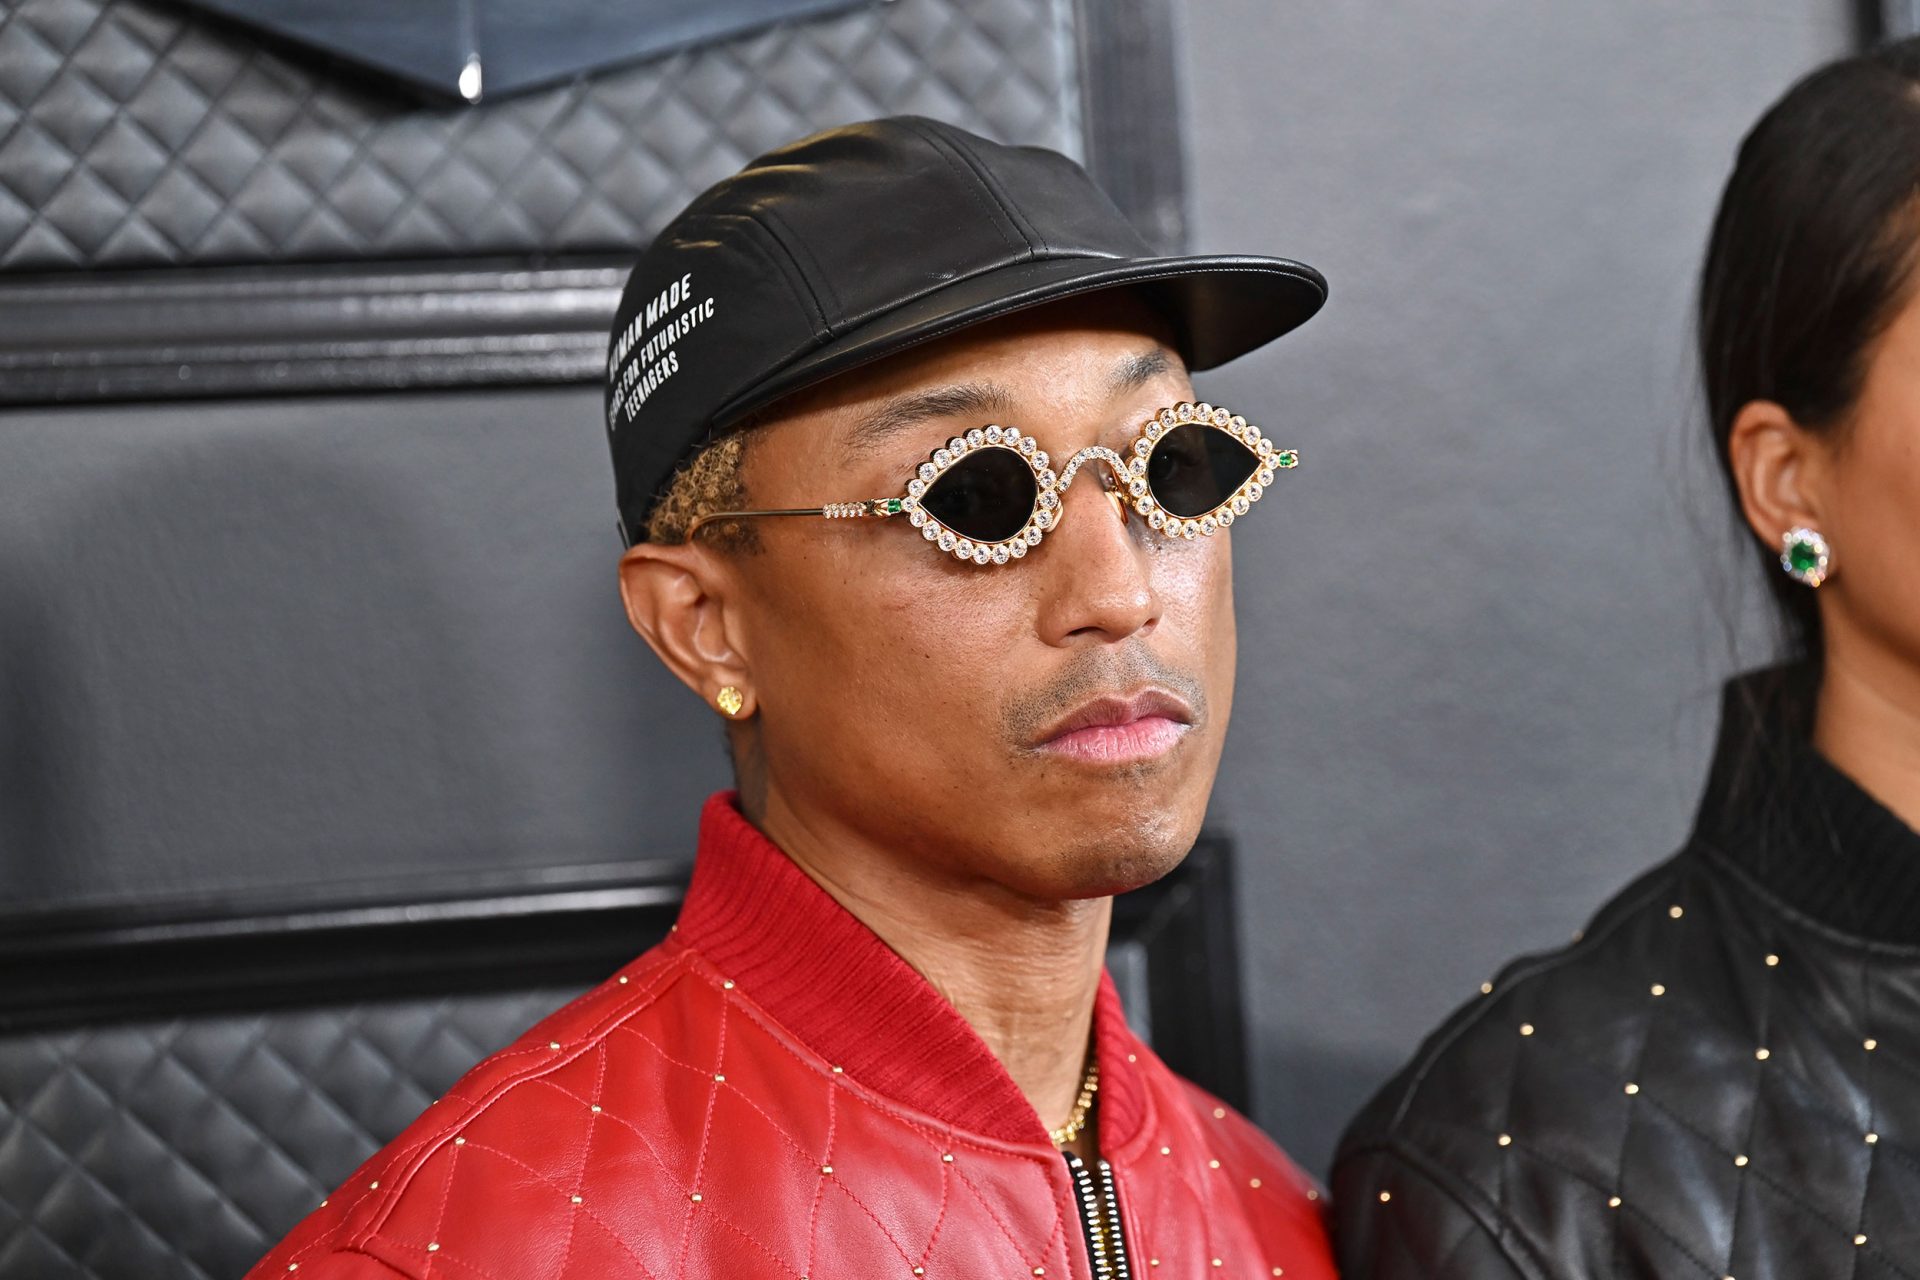 Pharrell Williams becomes the head of Louis Vuitton menswear